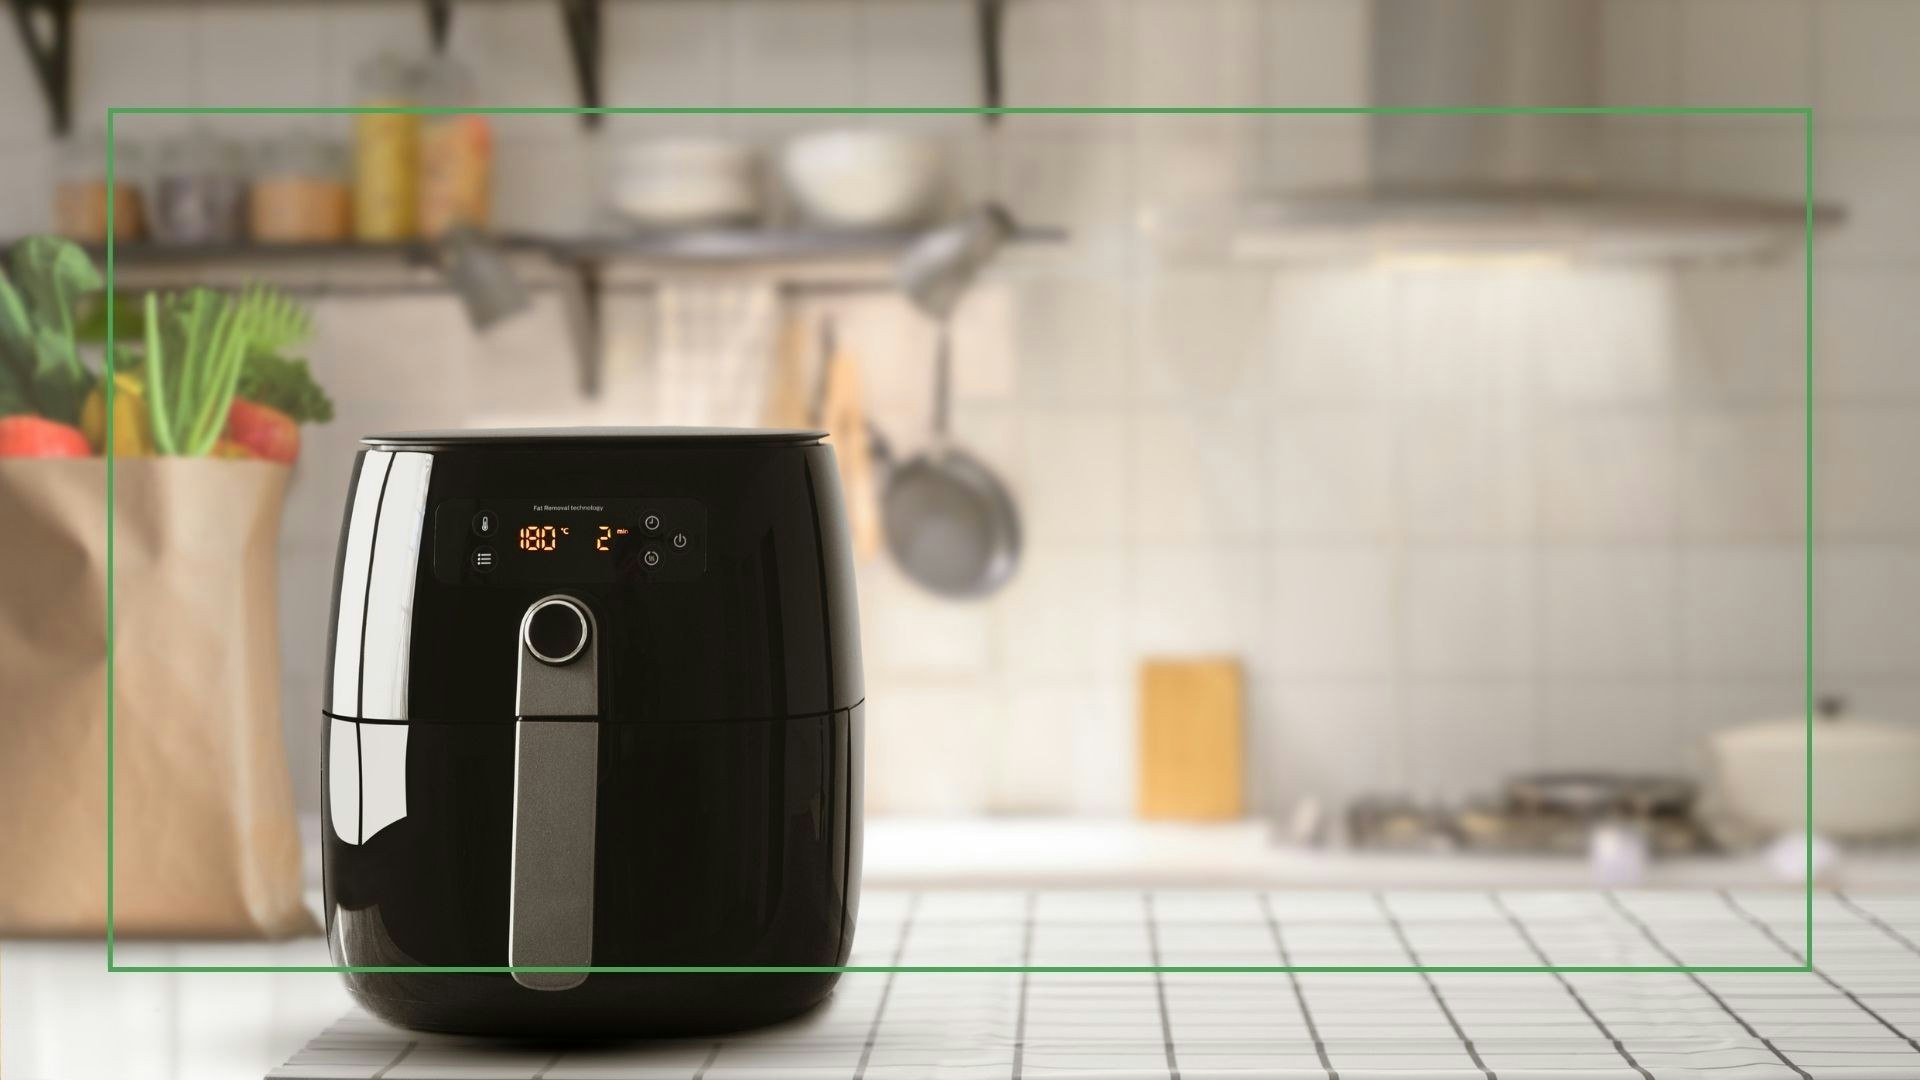 The Cosori Turbo Blaze is the perfect Air Fryer for 2024 to meet your , air fryer